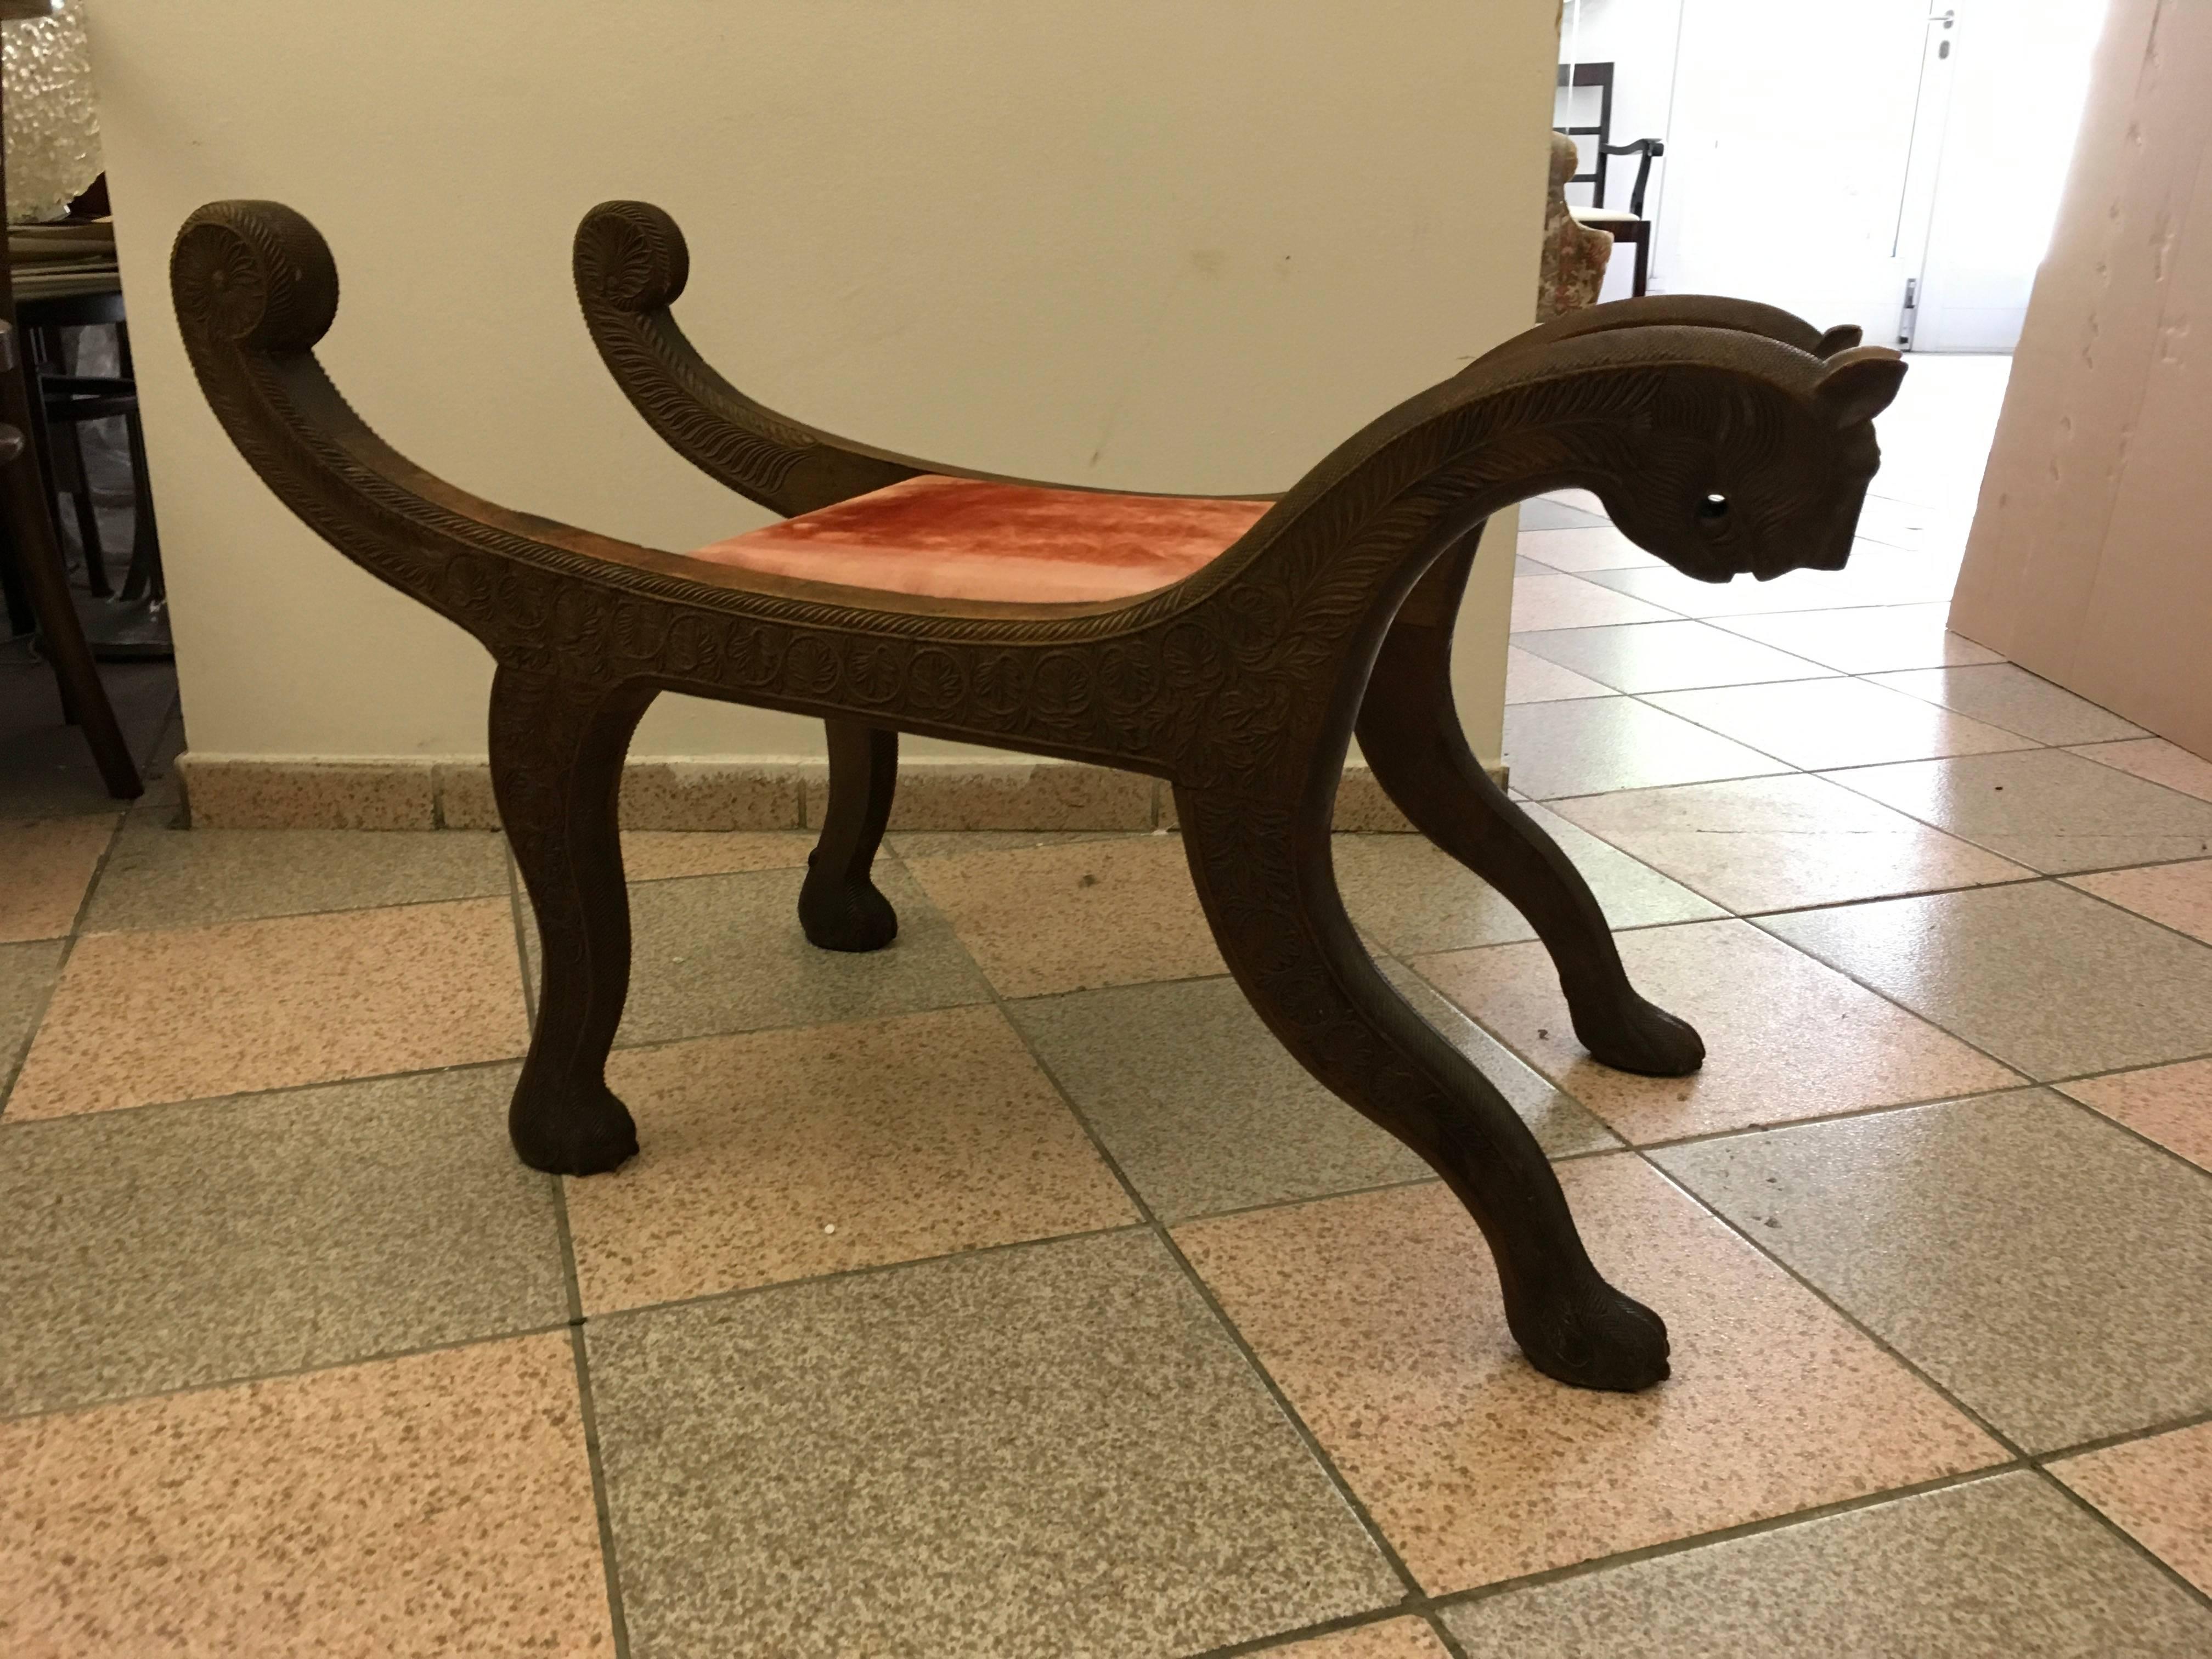 An Egyptian Revival style heavily carved wood and highly decorative, sculptural lion bench, or stool with upholstery.
Very good vintage condition with age appropriate wear.